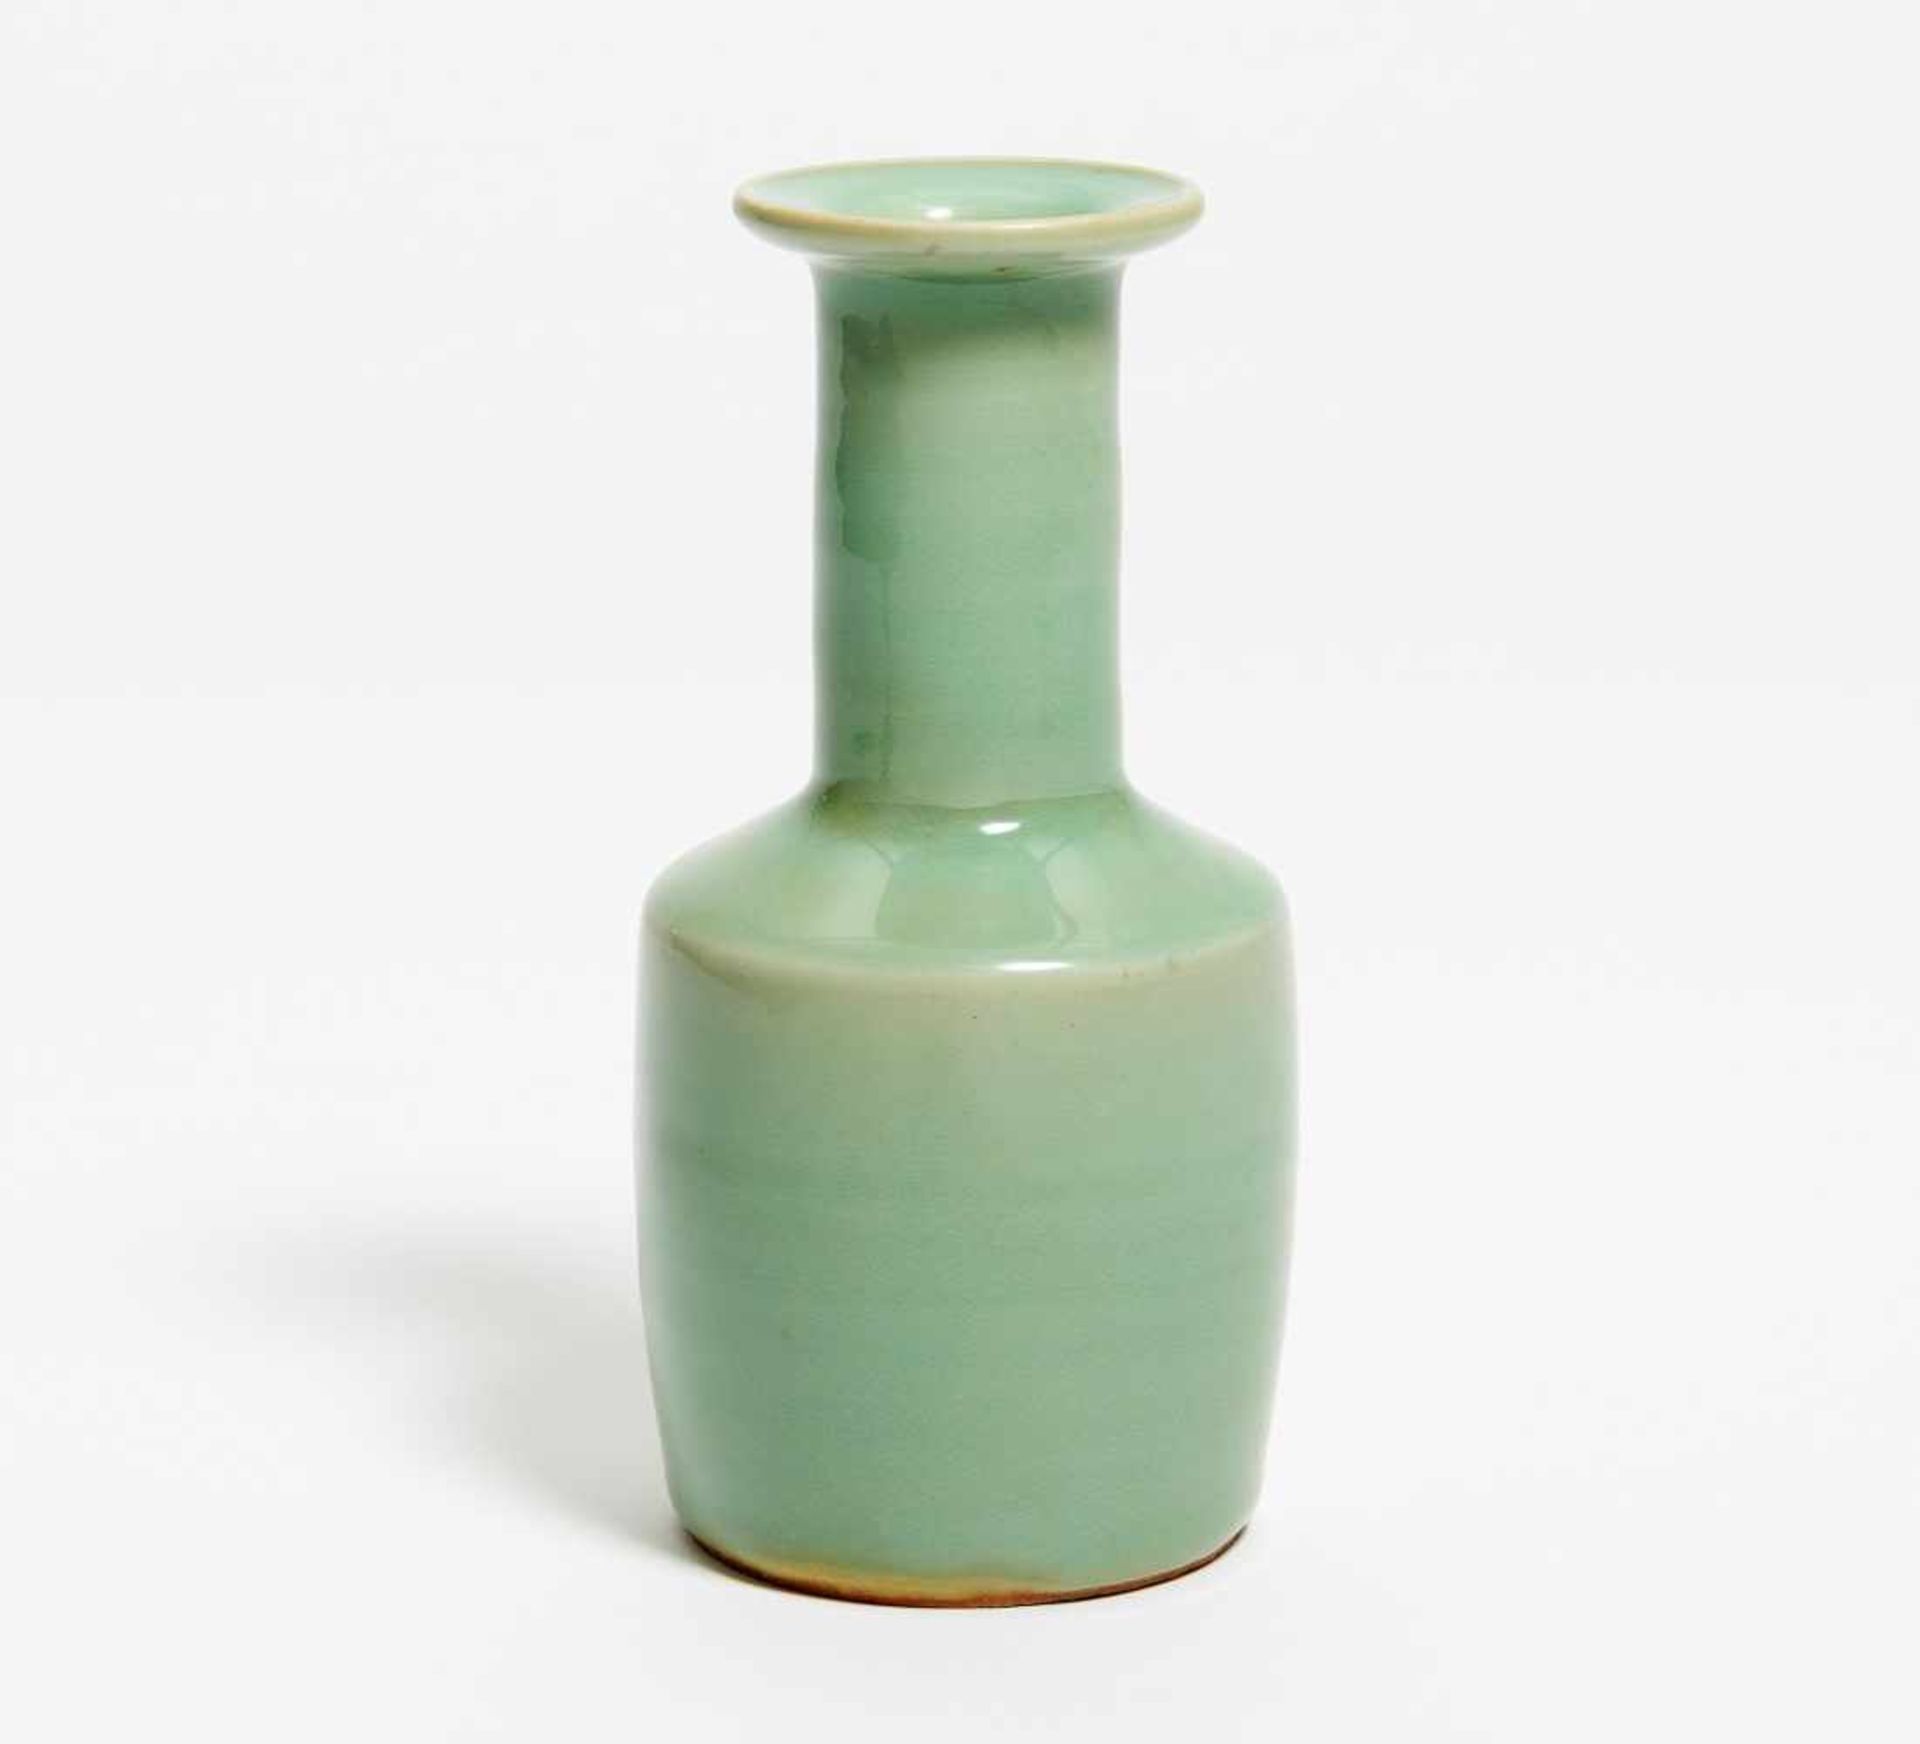 SMALL LONGQUAN CELADON MALLET-SHAPED VASE. China. Porcelain with celadon green glaze. Cylindrical